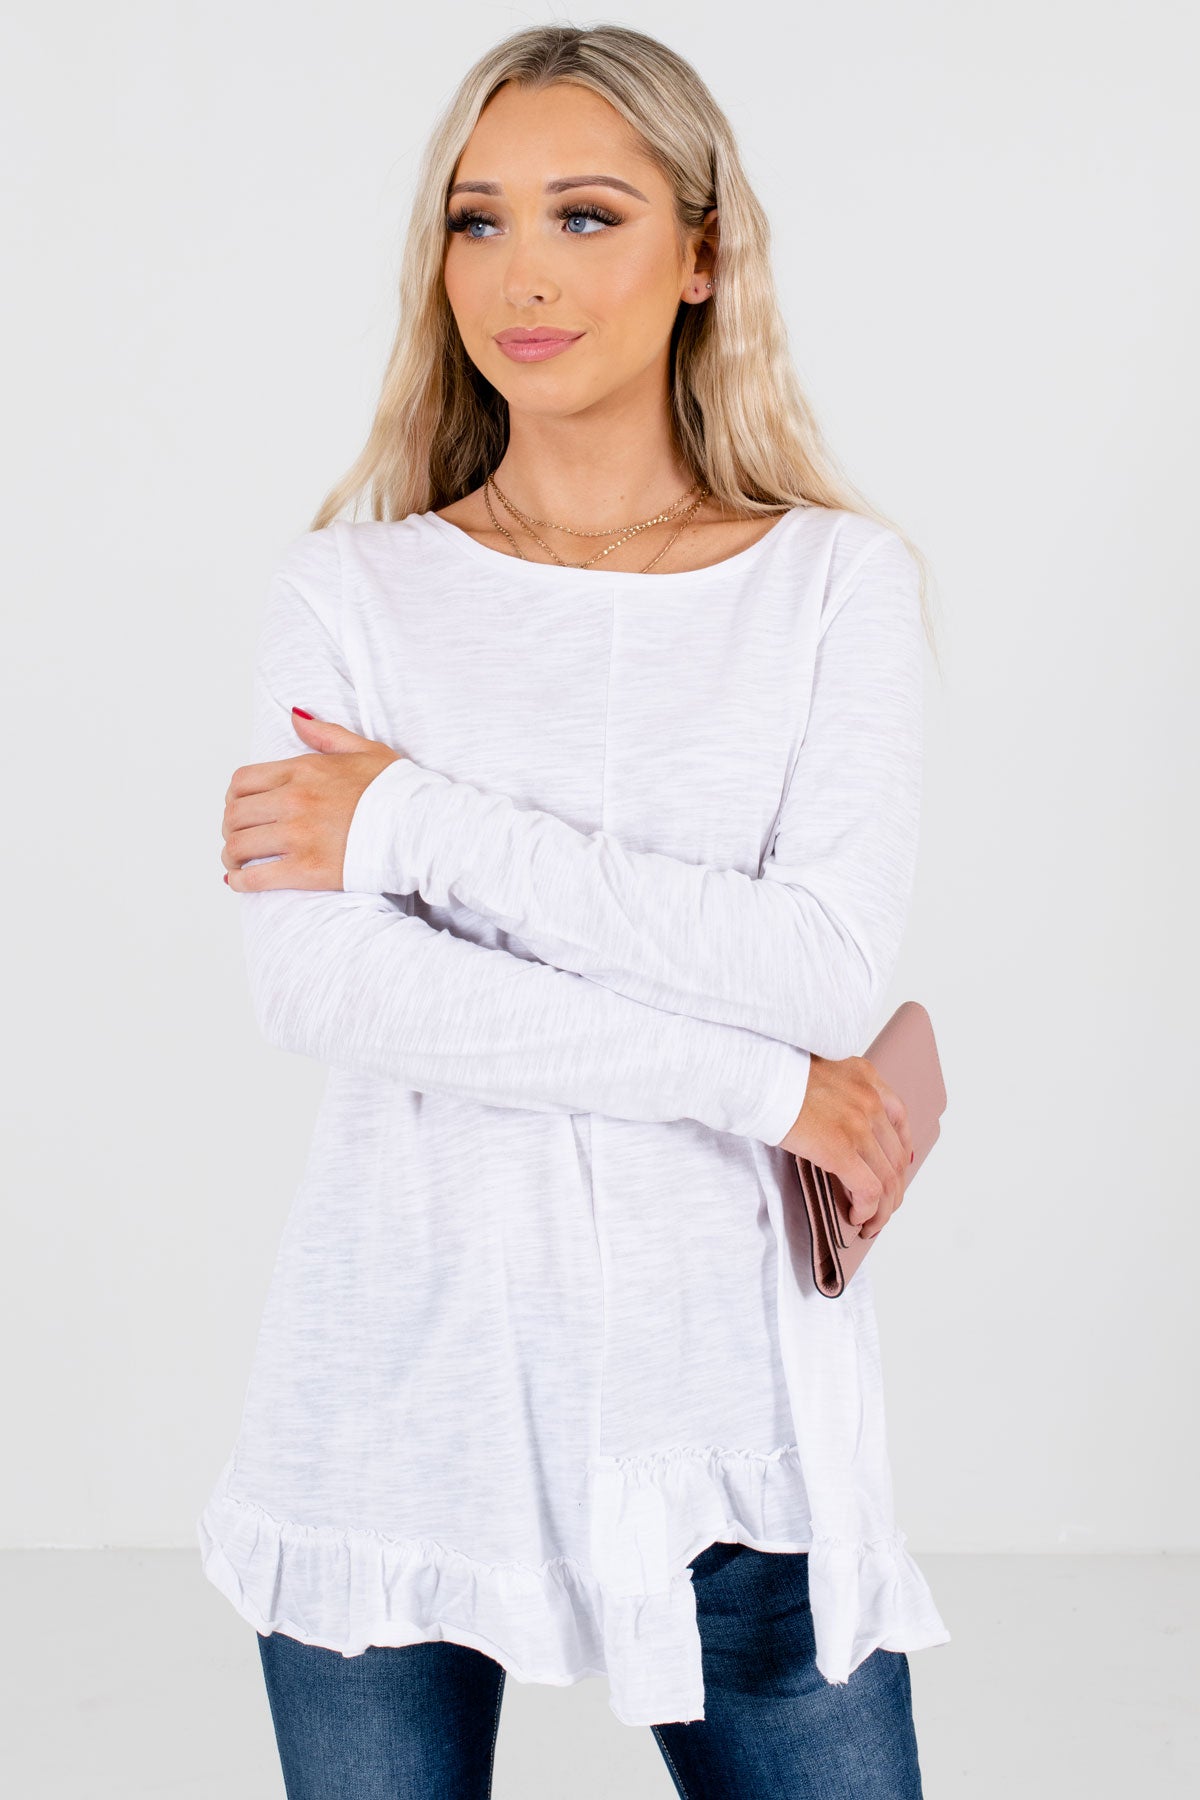 Women's White Layering Boutique Tops